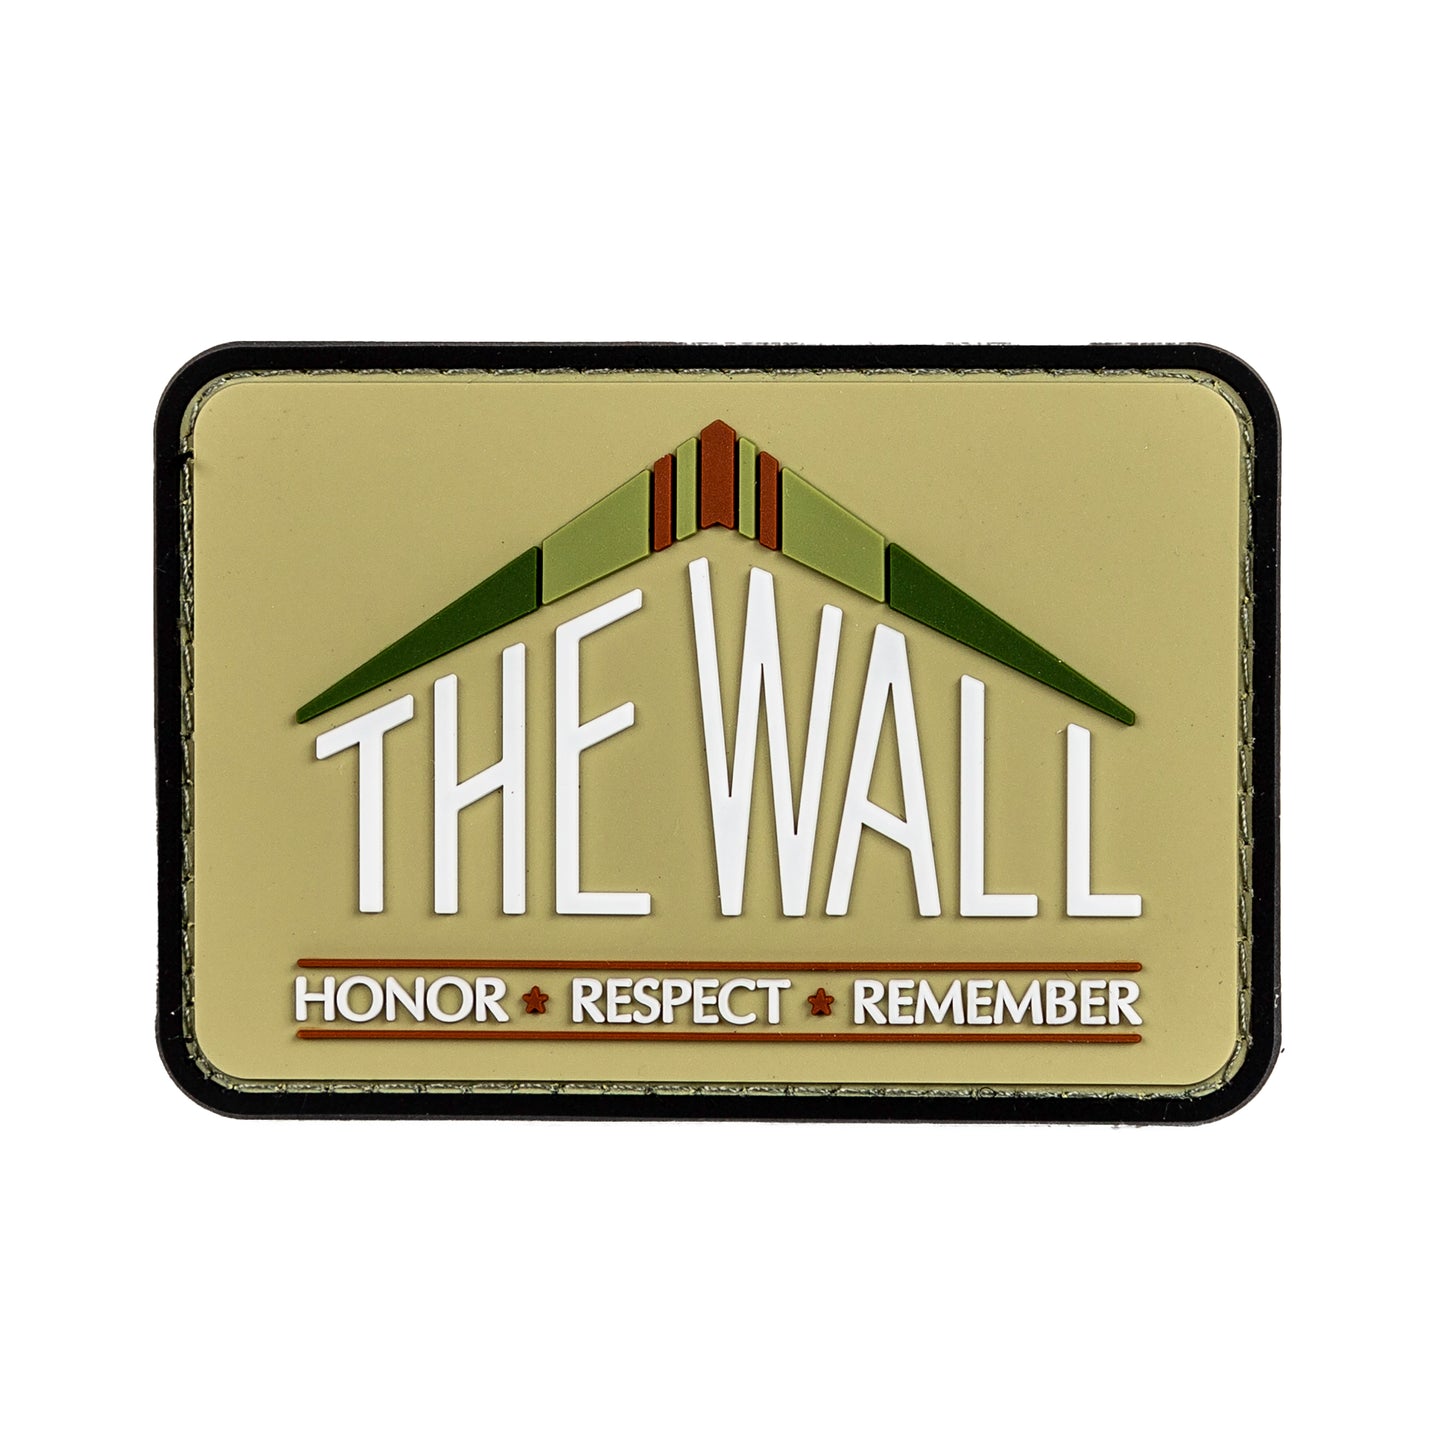 3x2 The Wall Tan Patch